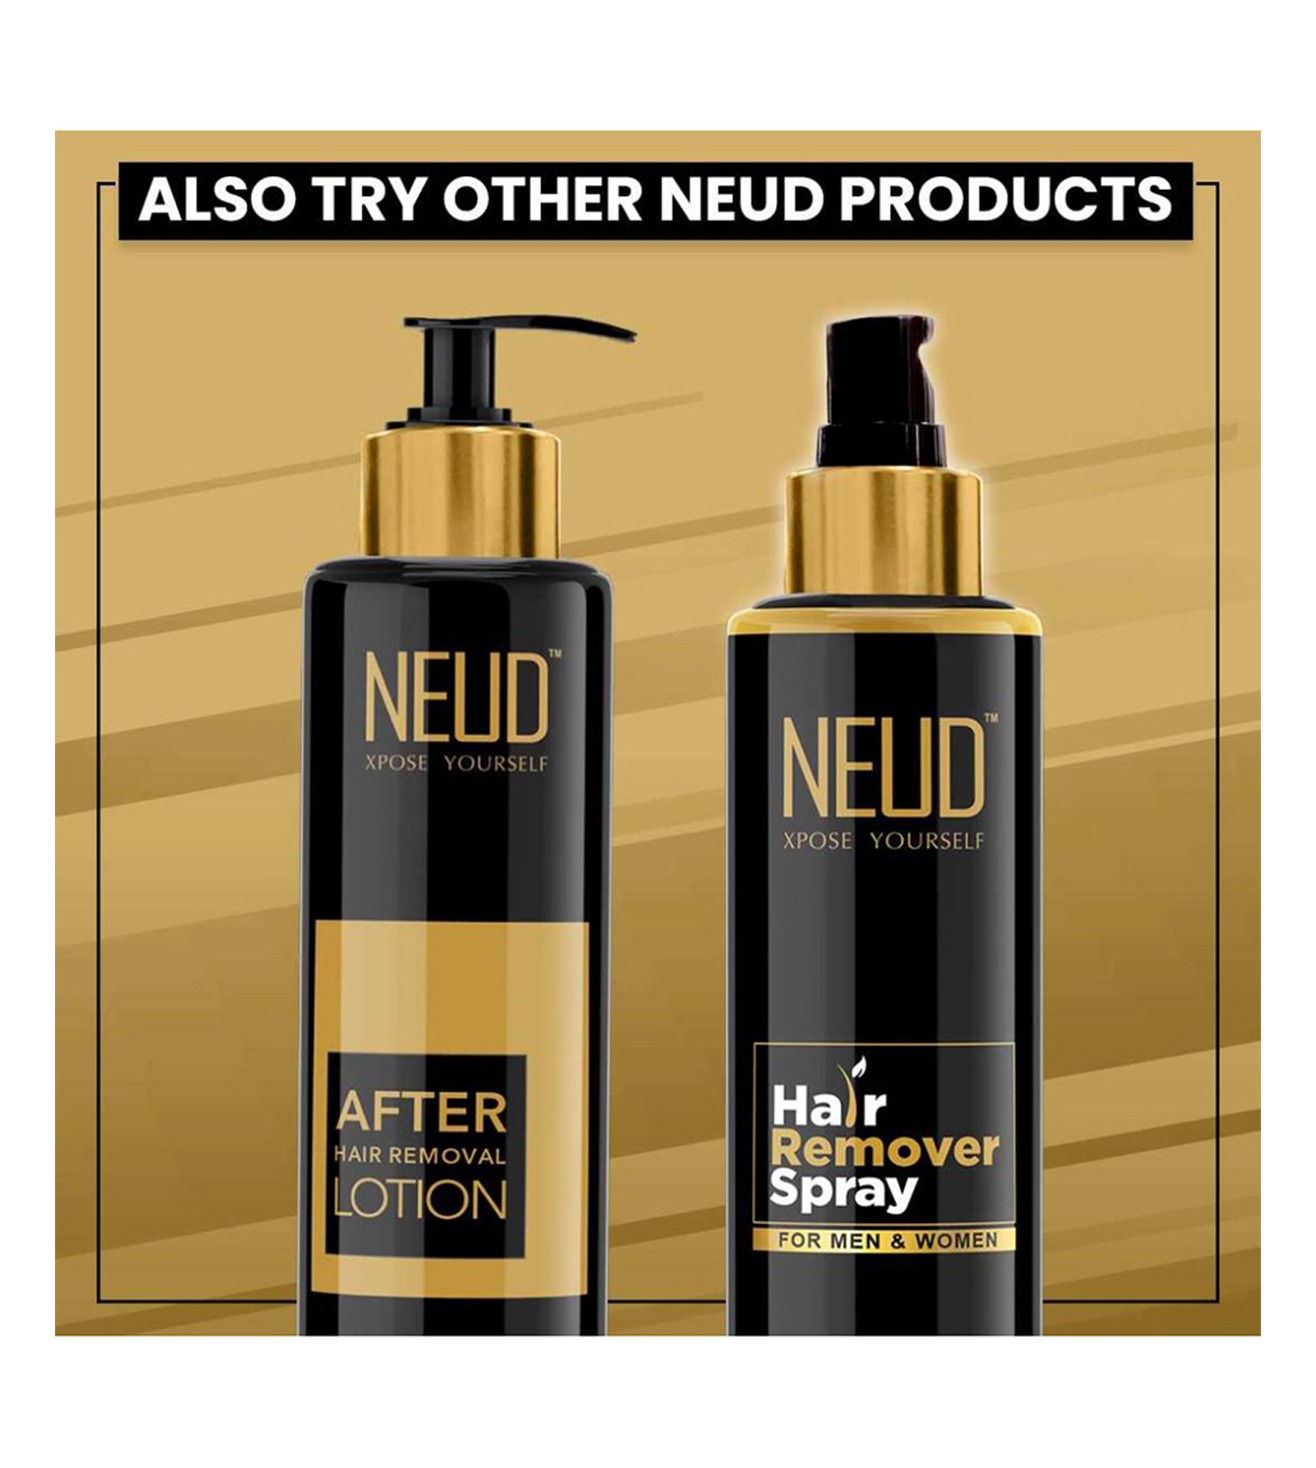 NEUD Natural Hair Inhibitor for Permanent Reduction of Unwanted Hair in Men  & Women - 1 Pack - 80 gm from NEUD at best prices on Tata Beauty